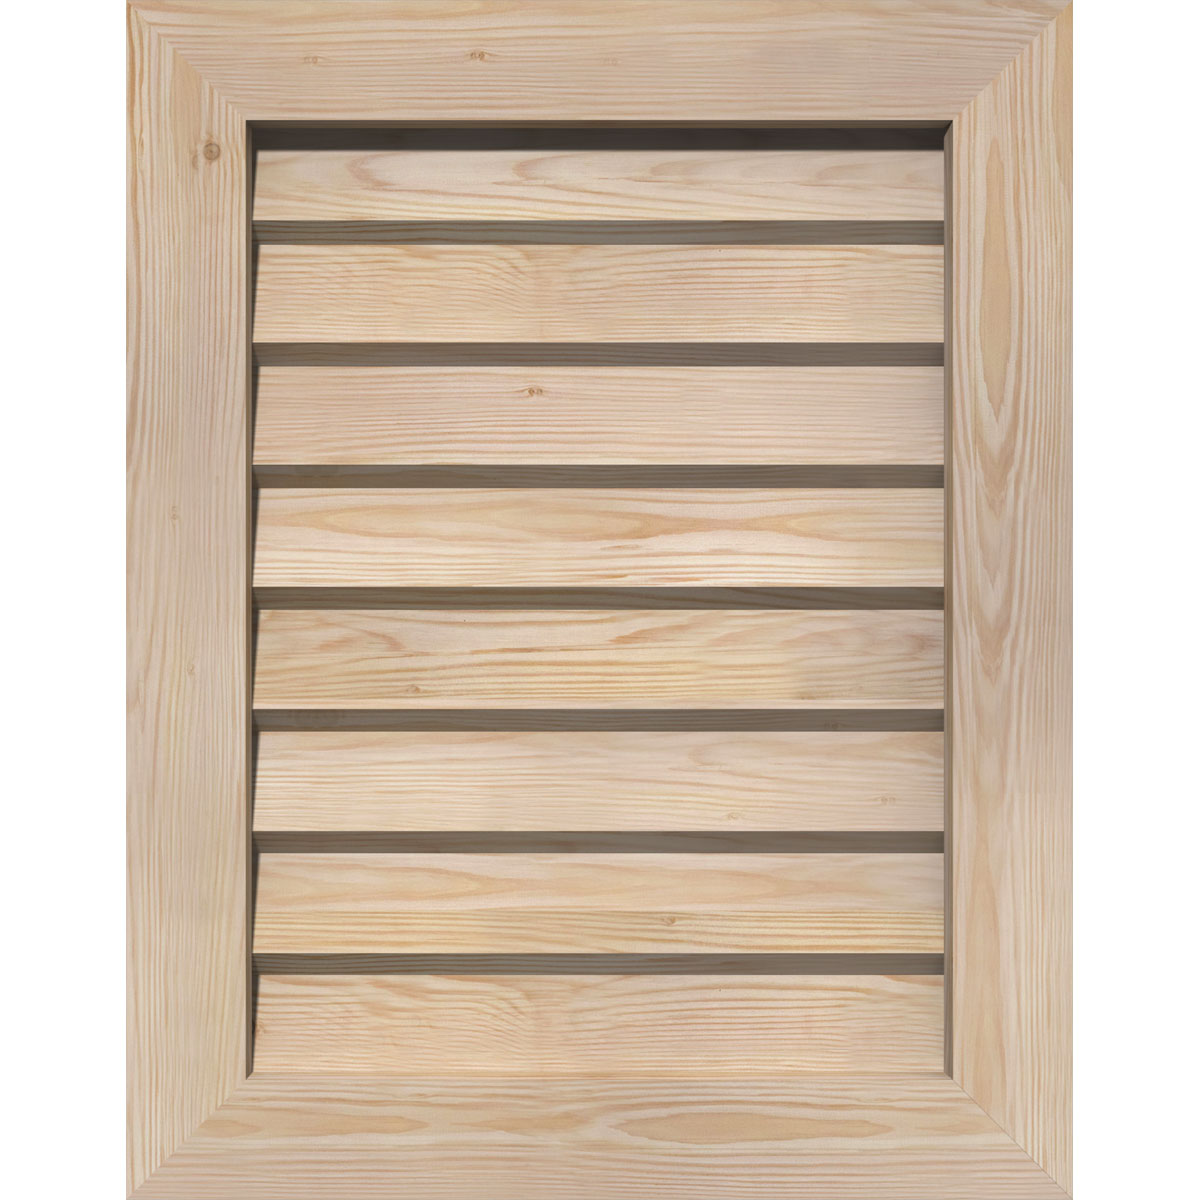 16"W x 30"H Vertical Gable Vent (21"W x 35"H Frame Size): Unfinished, Non-Functional, Smooth Pine Gable Vent w/ Decorative Face Frame - image 1 of 12